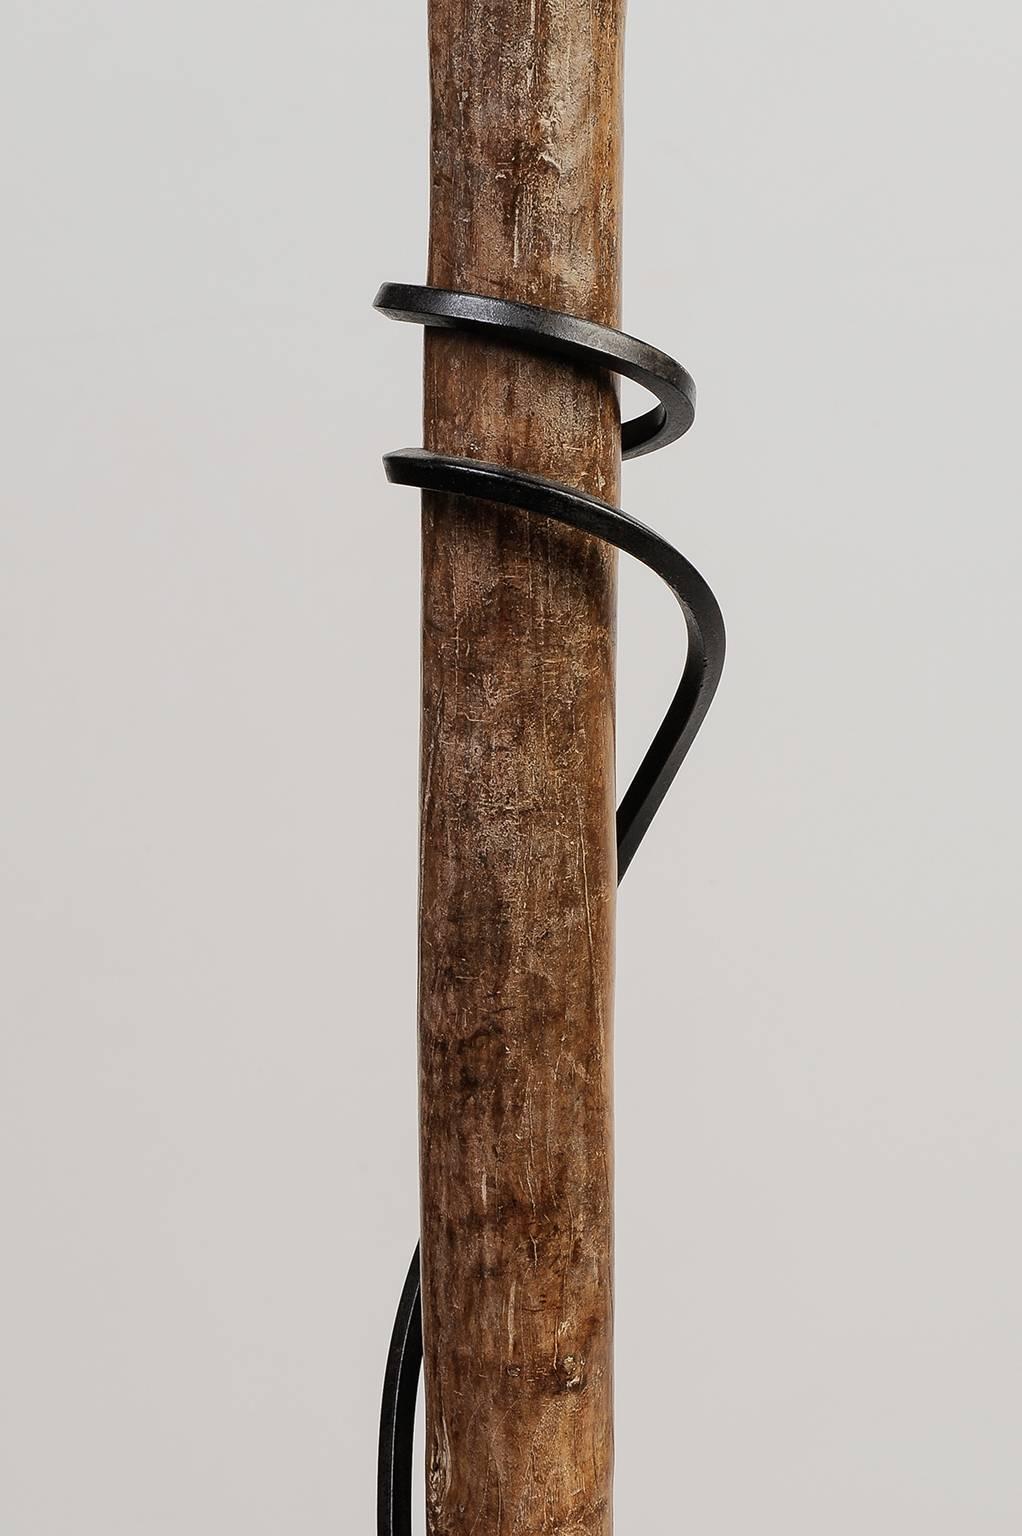 Old Berber Tuareg tent poles, on iron bases: to make of this raw object a true object of art, with a story, as always.
O/5452 -